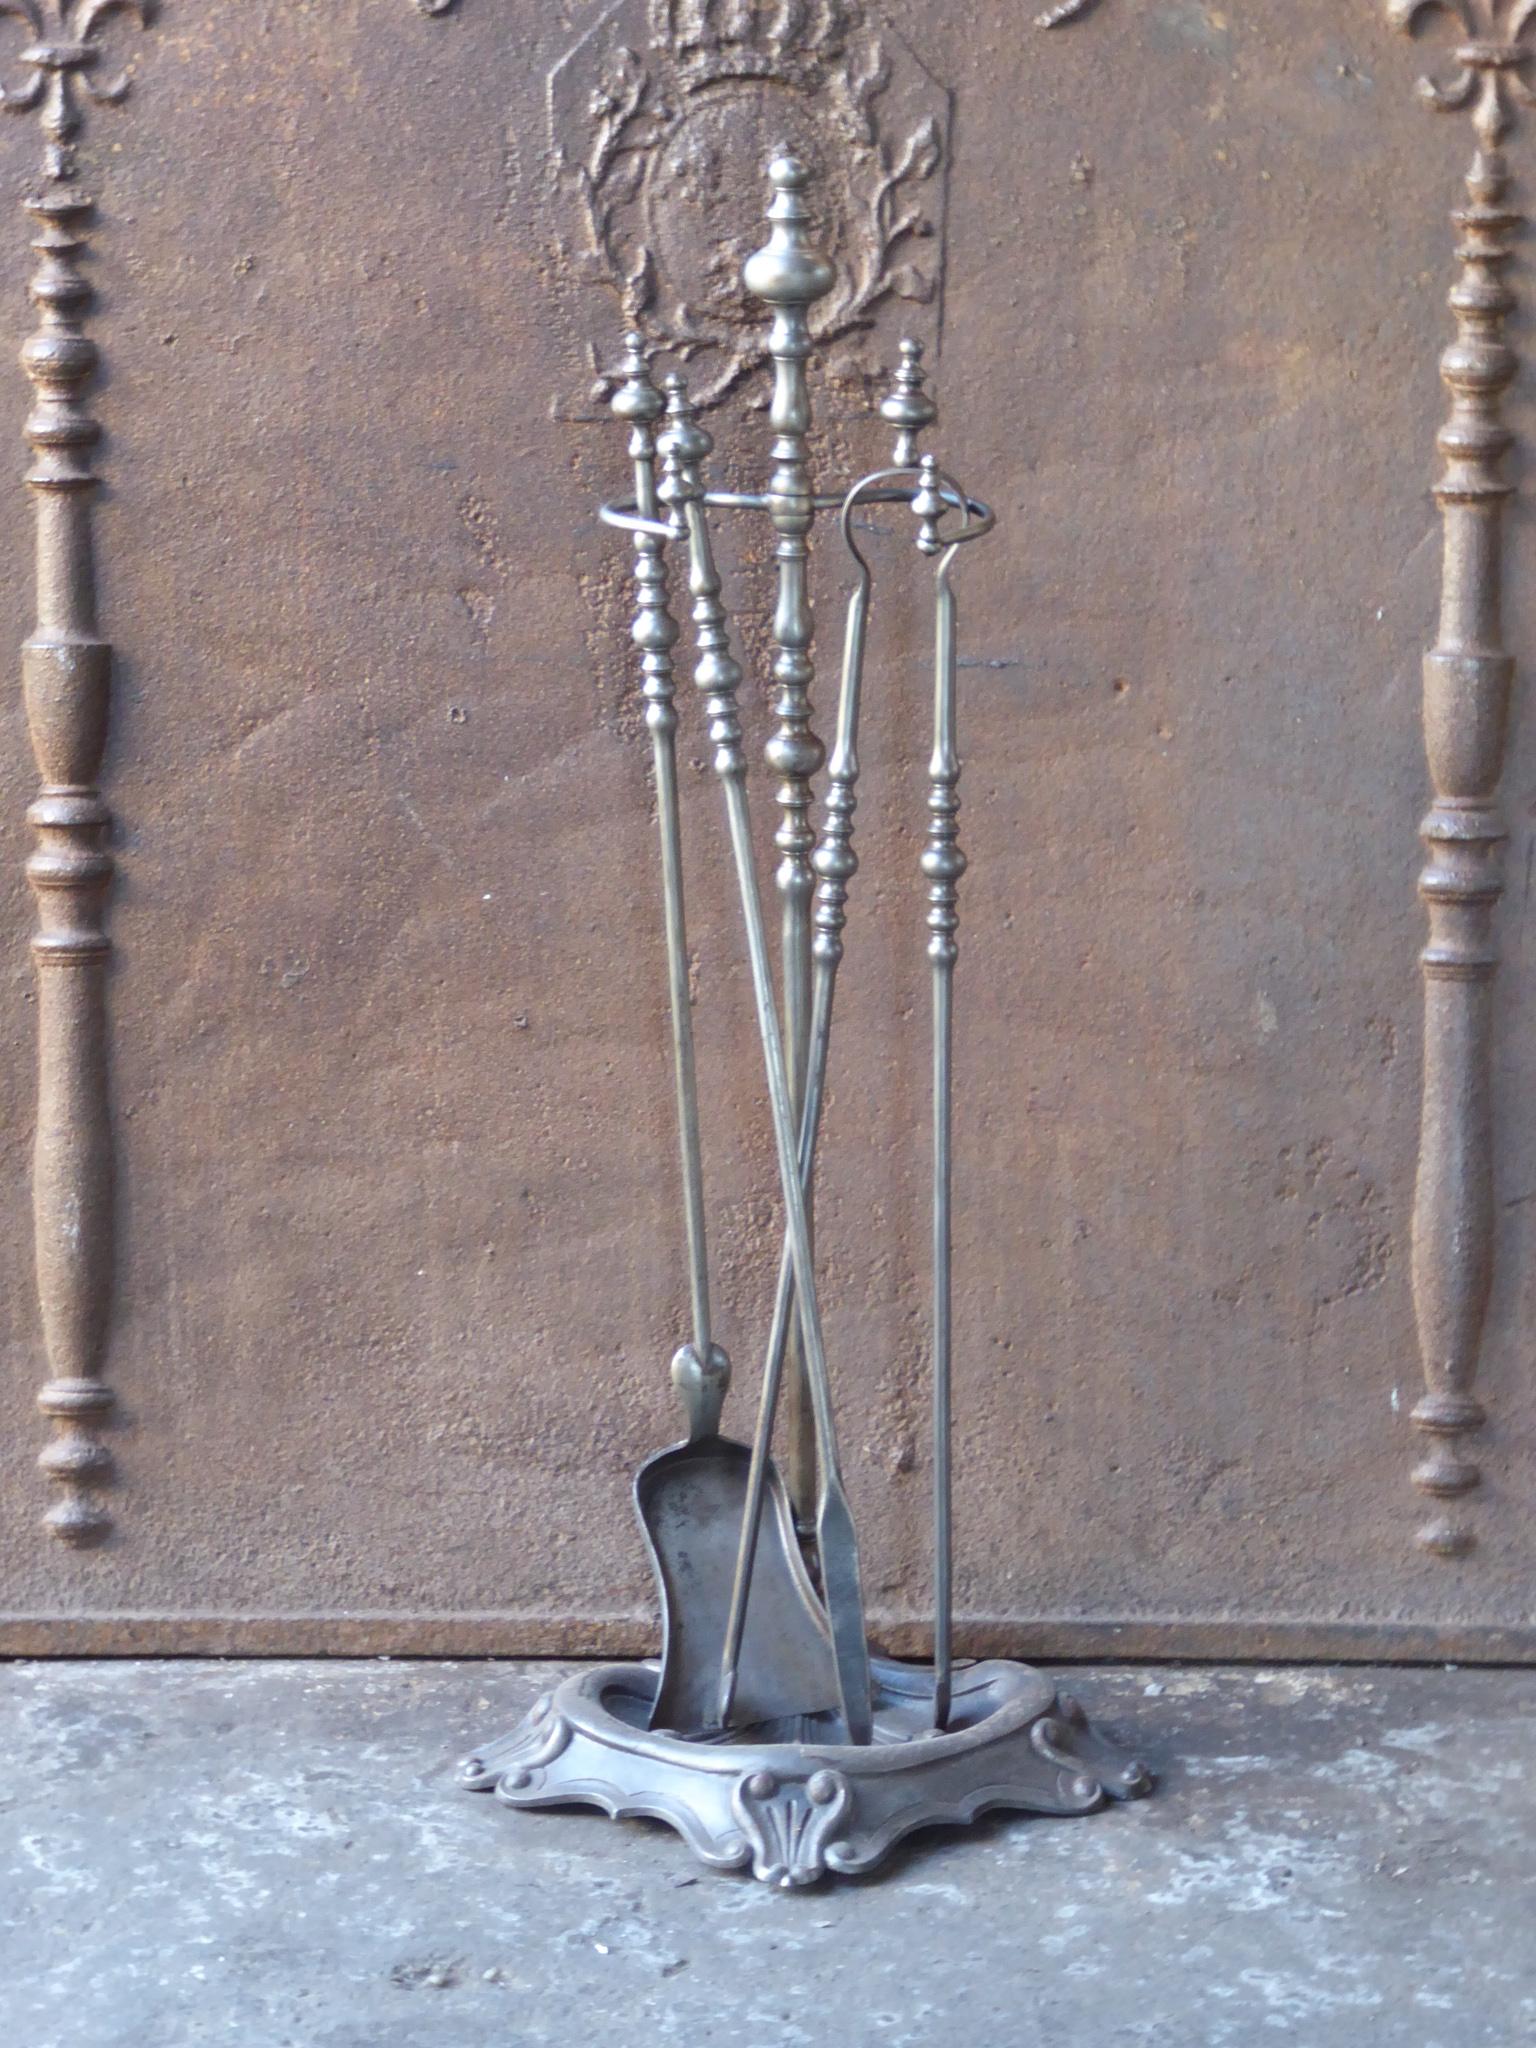 19th century Napoleon III fireplace toolset made of cast iron and wrought iron. The toolset is in a good condition and is fully functional.







